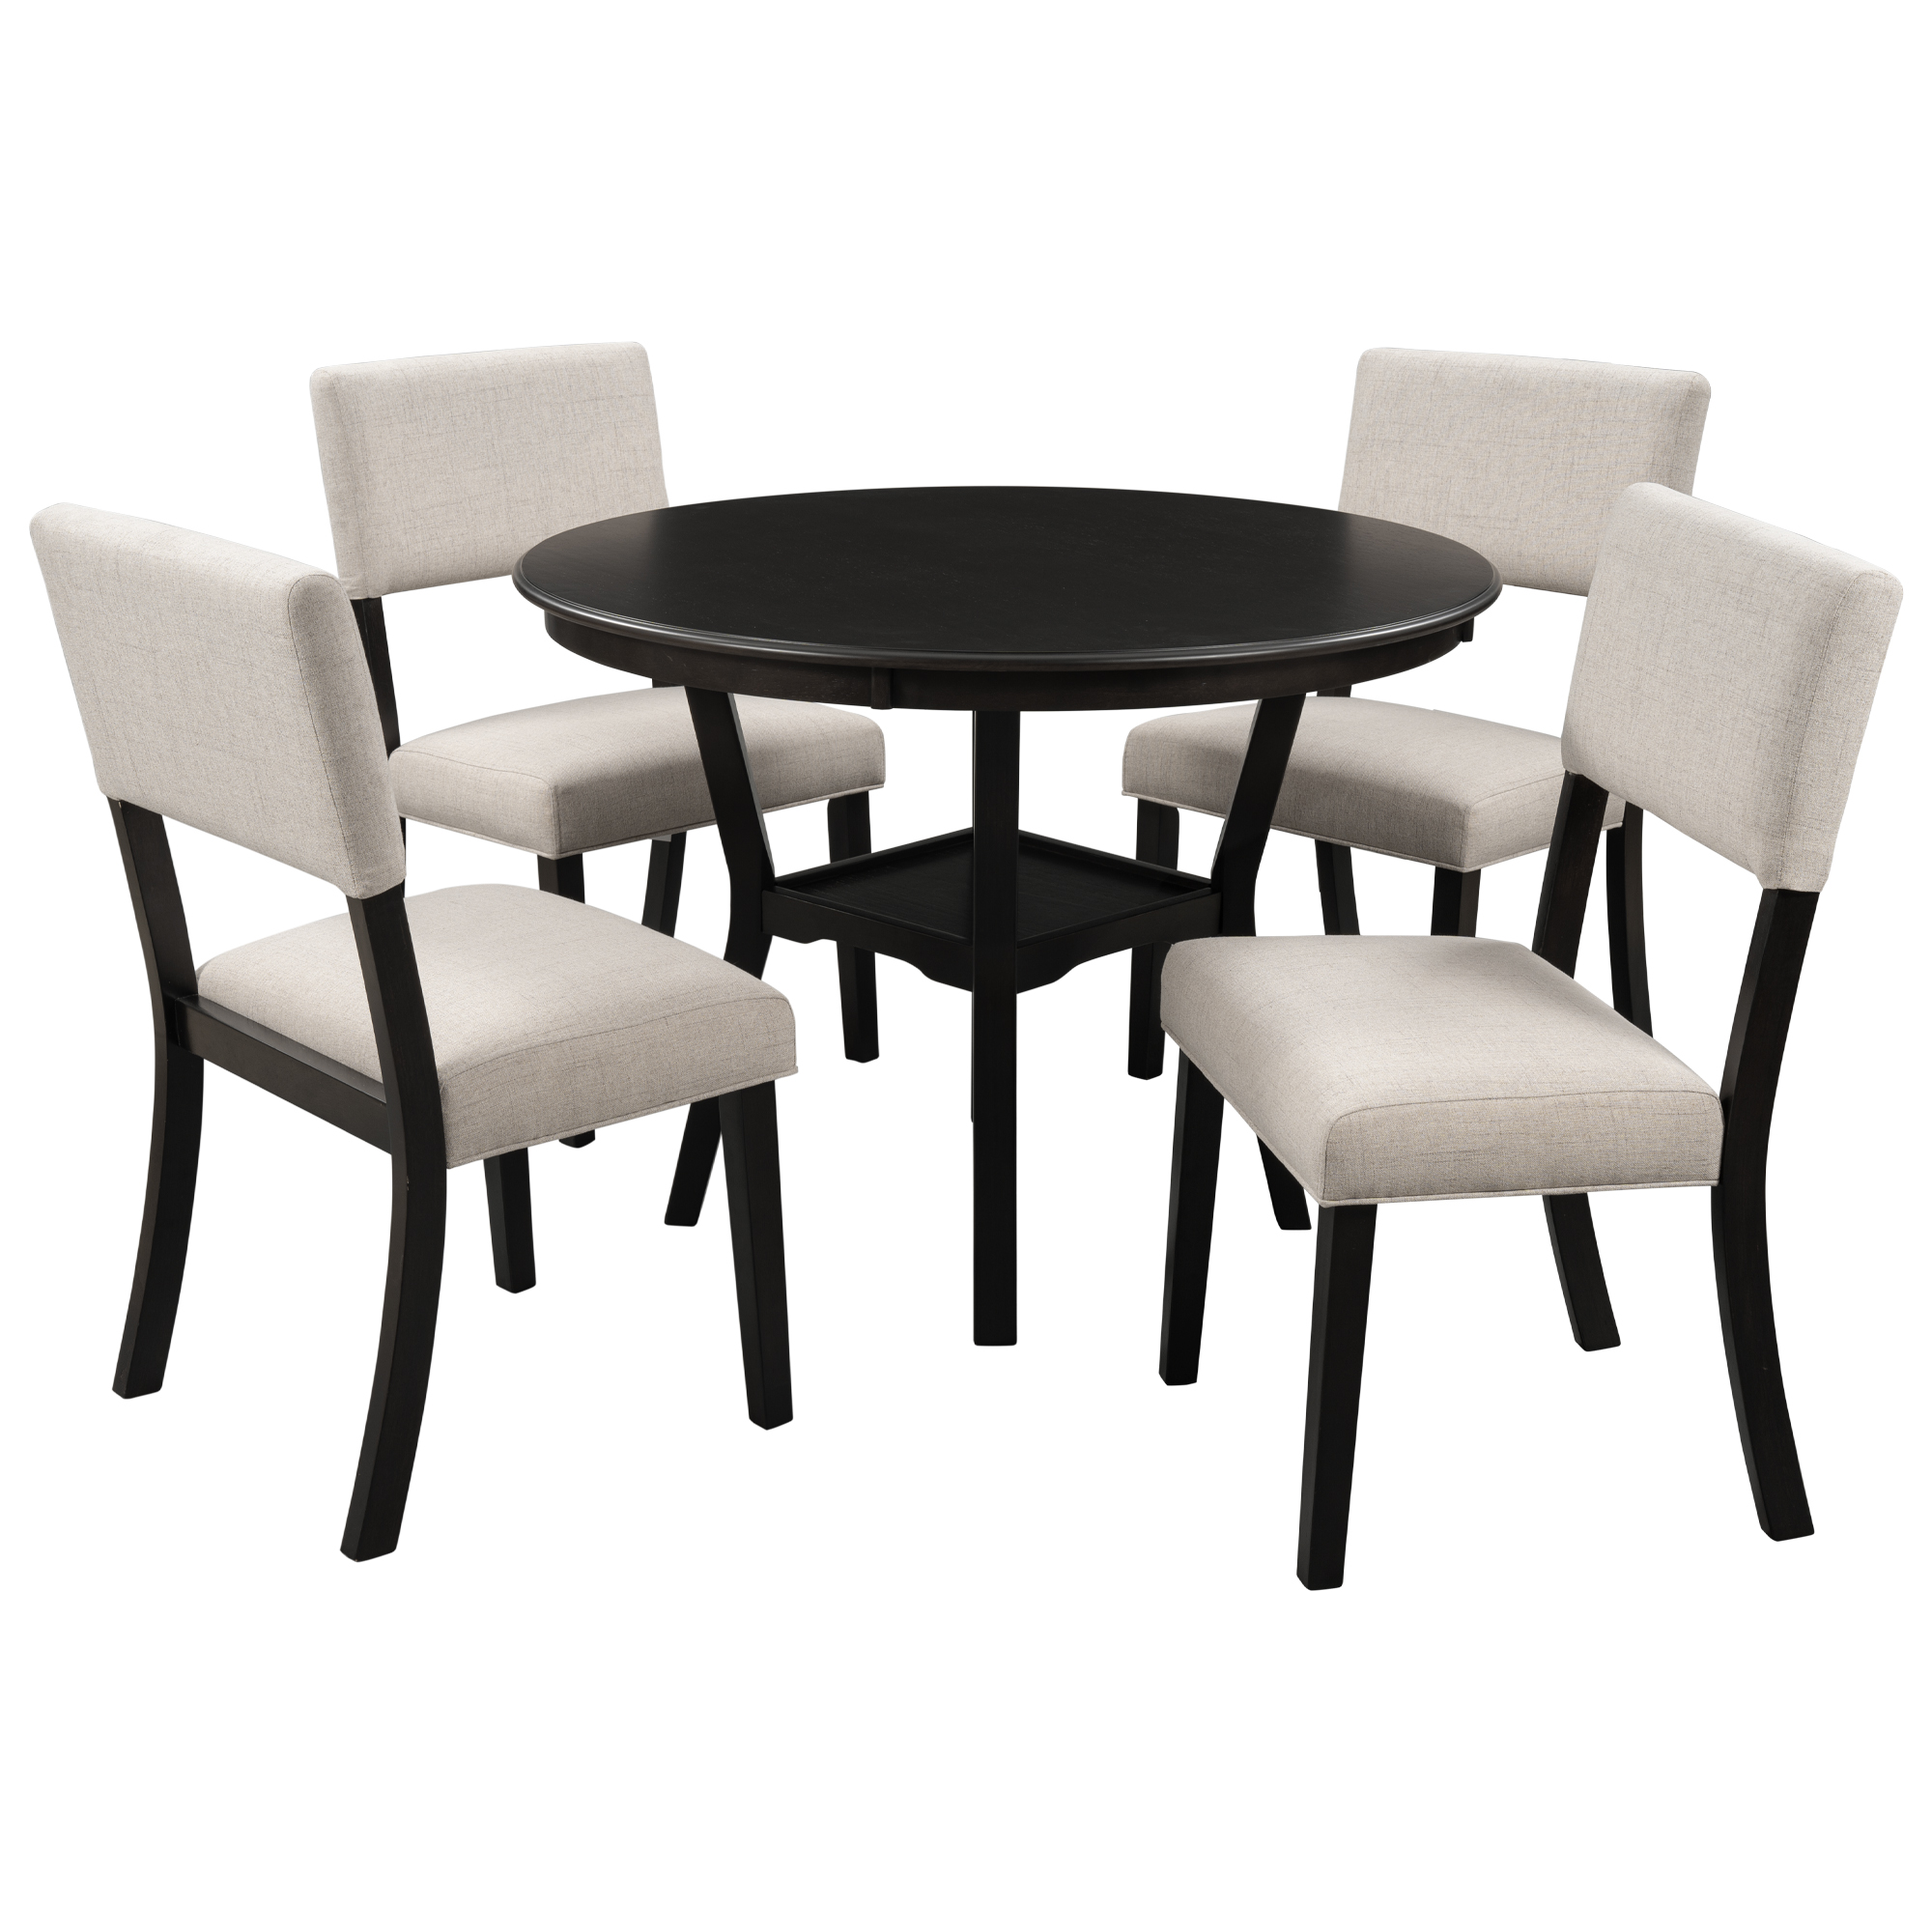 5-Piece Dining Table Set Round Table With Bottom Shelf, 4 Upholstered Chairs - ST000051AAP